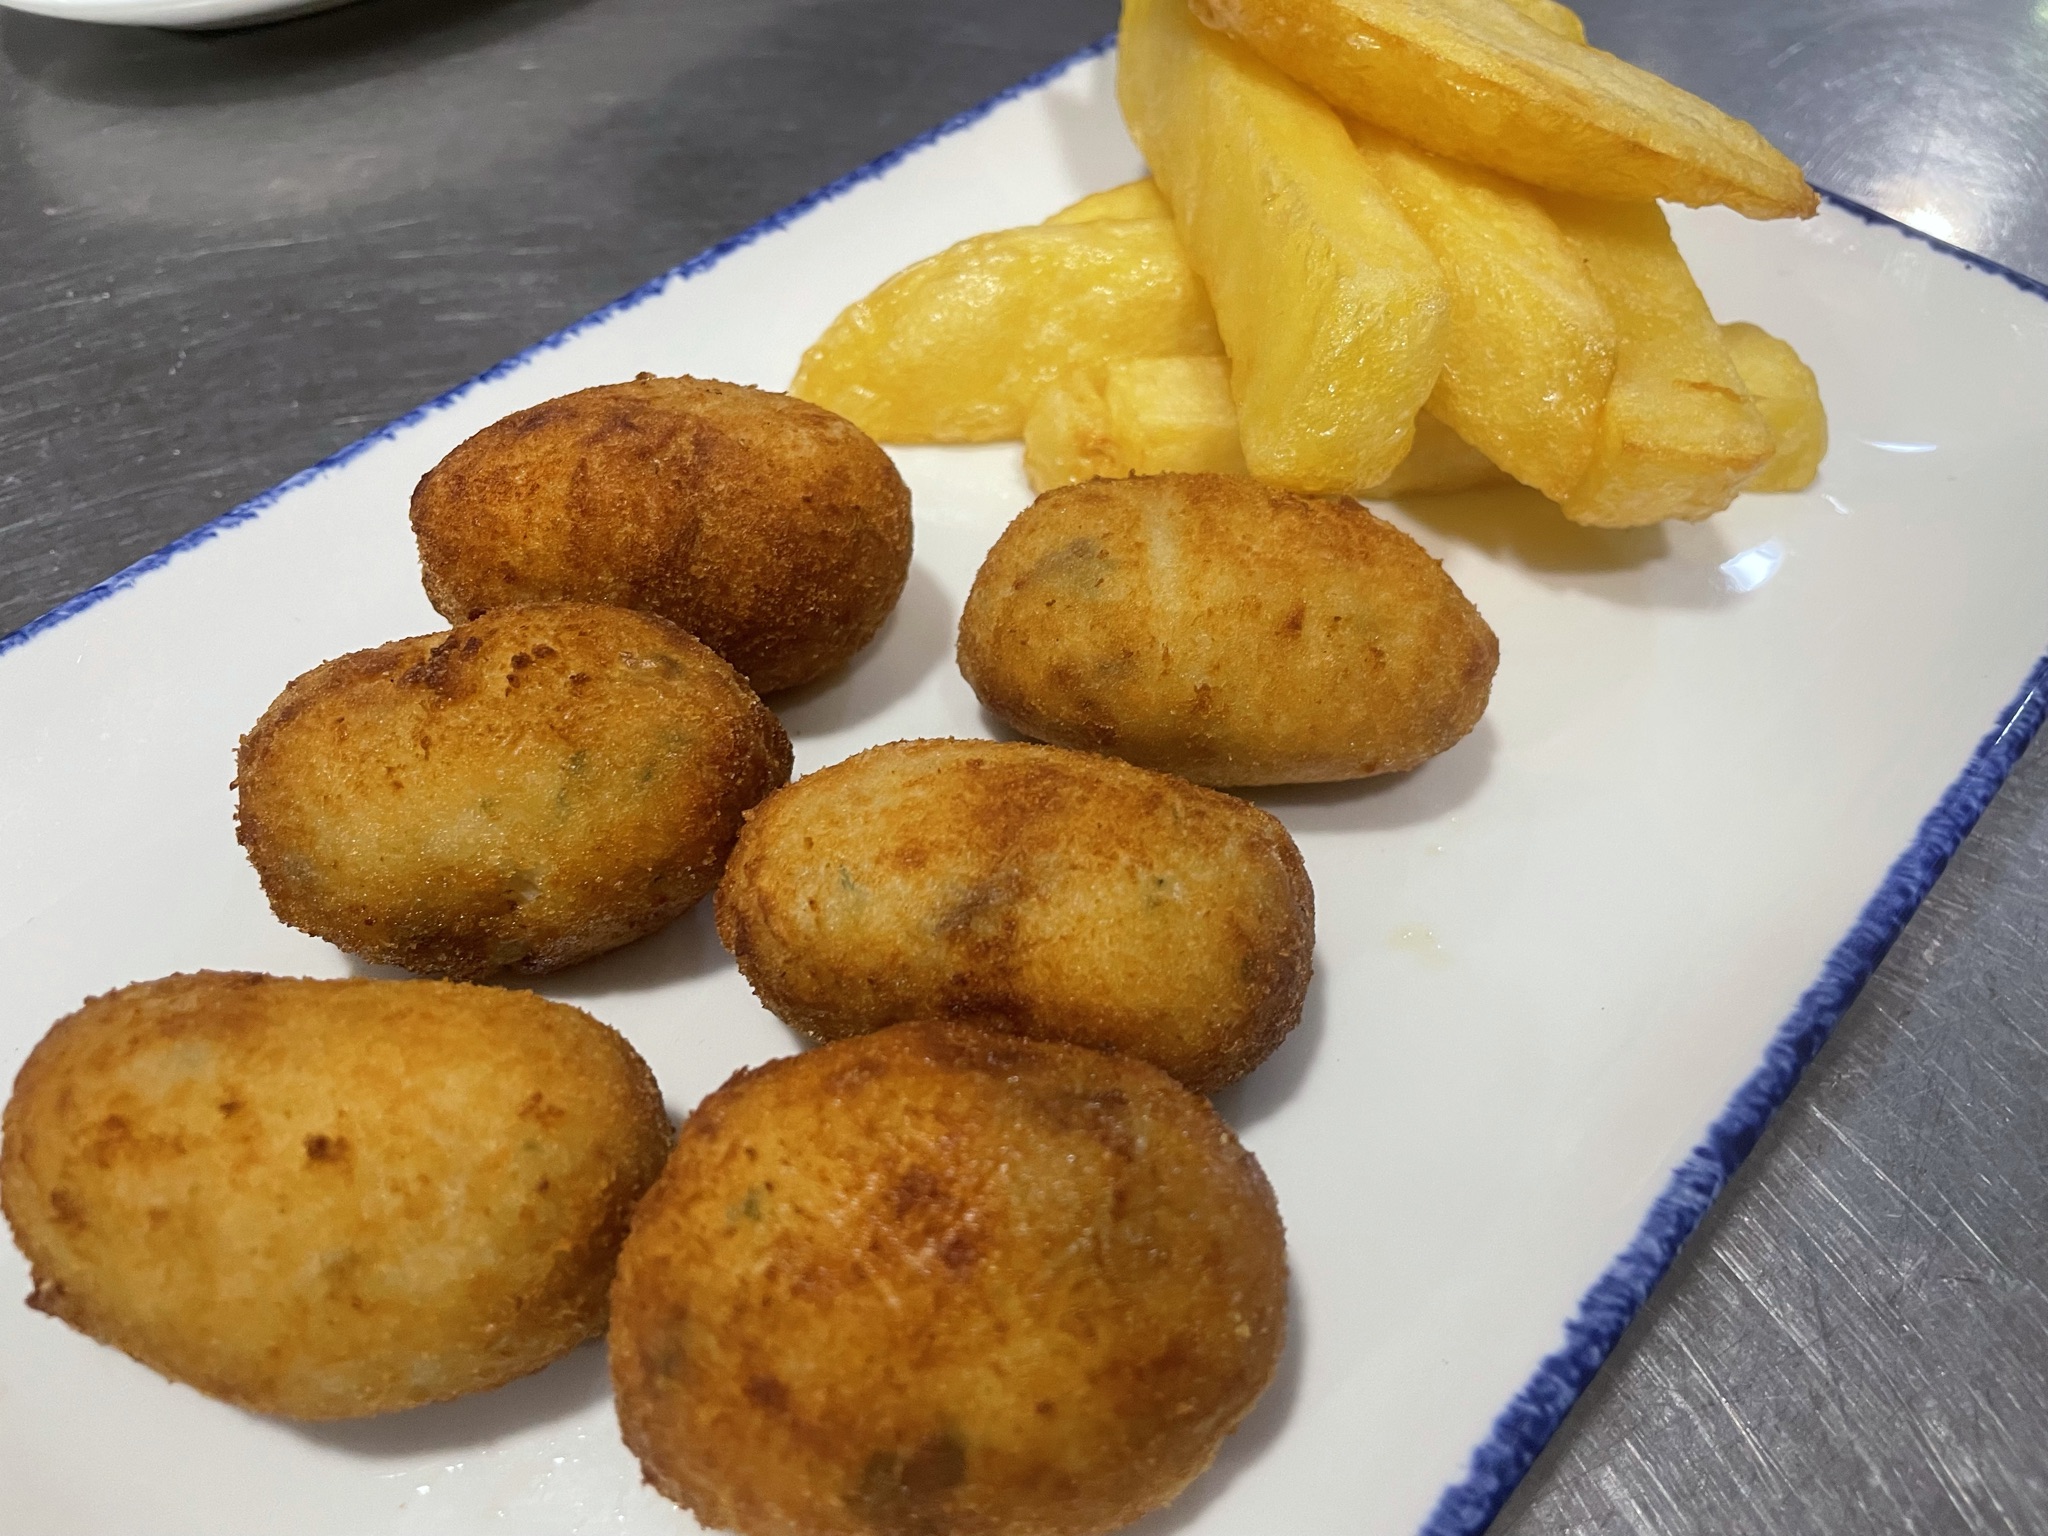 Croquettes (6 units) with chips for children